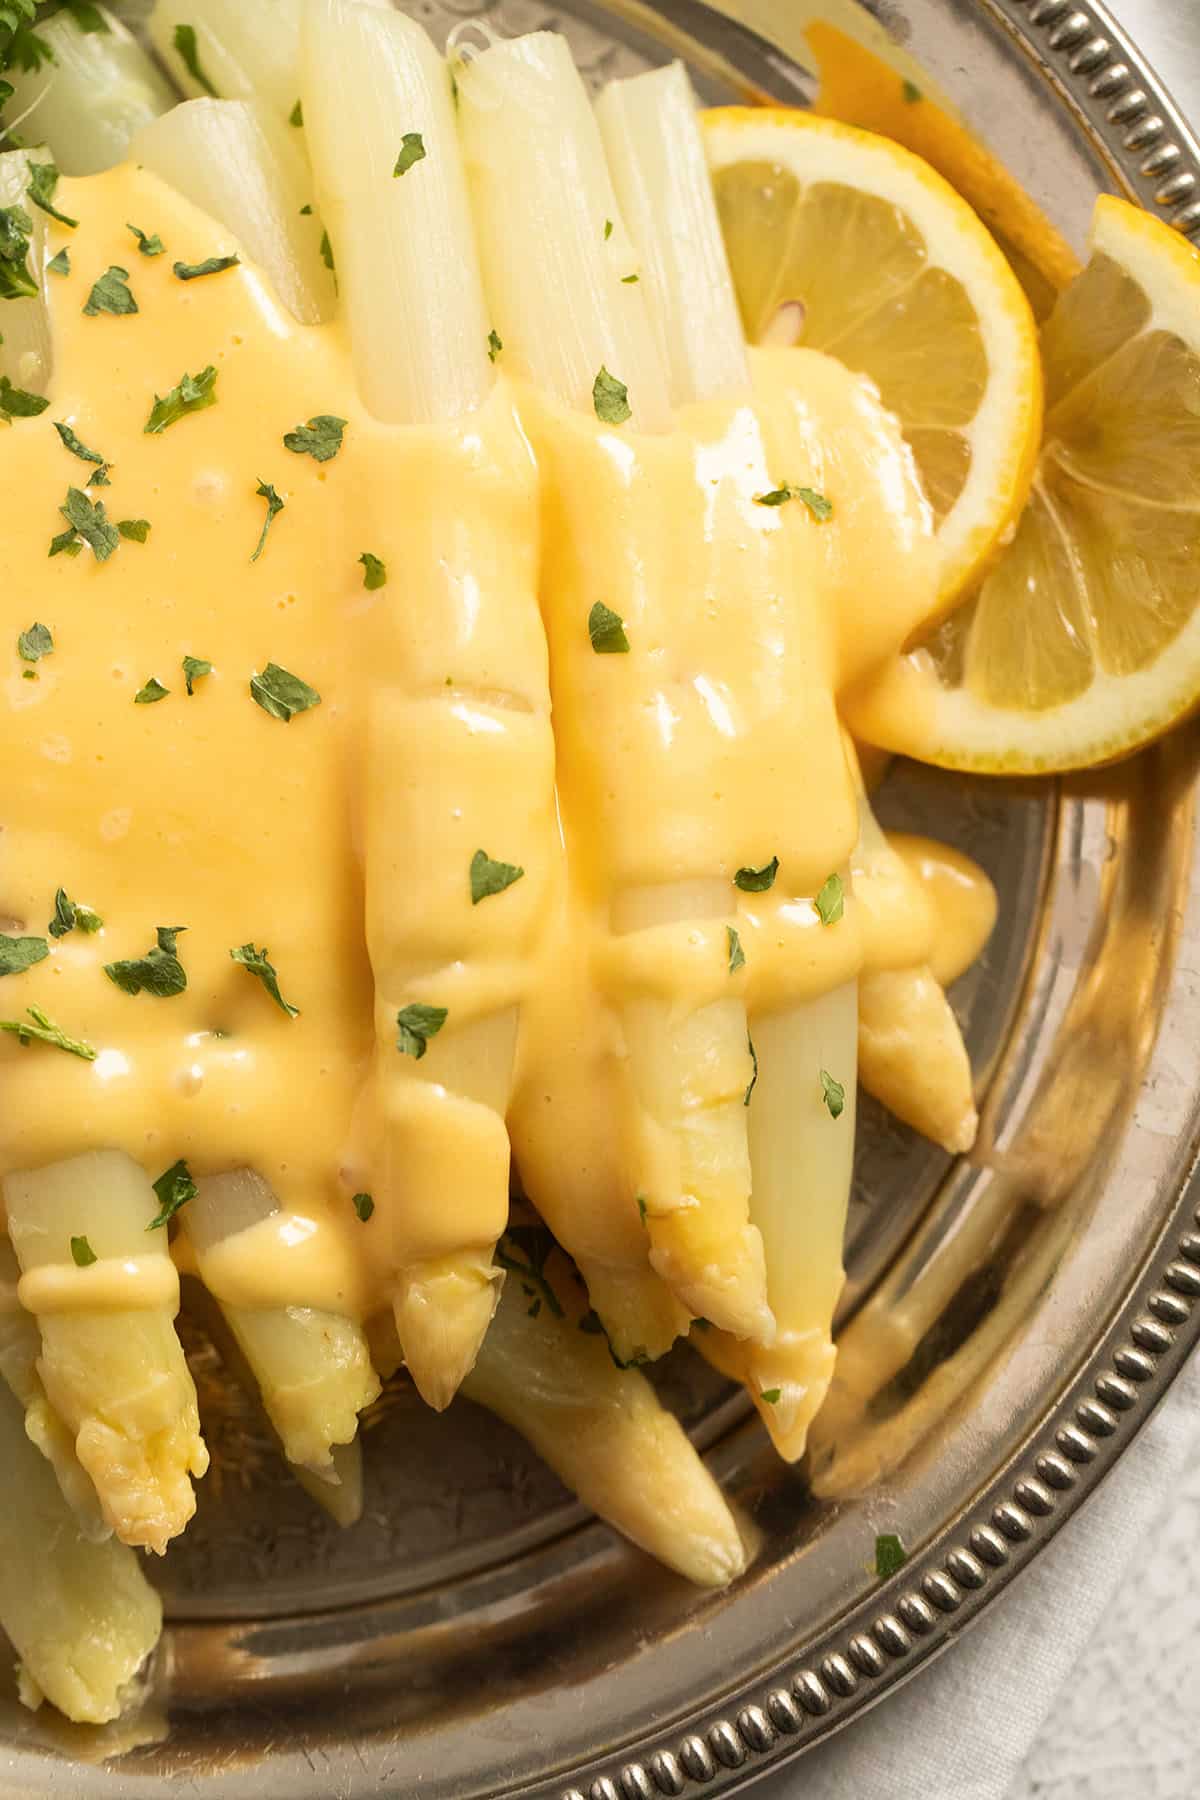 german white asparagus covered with sauce hollandaise and sprinkled with parsley.